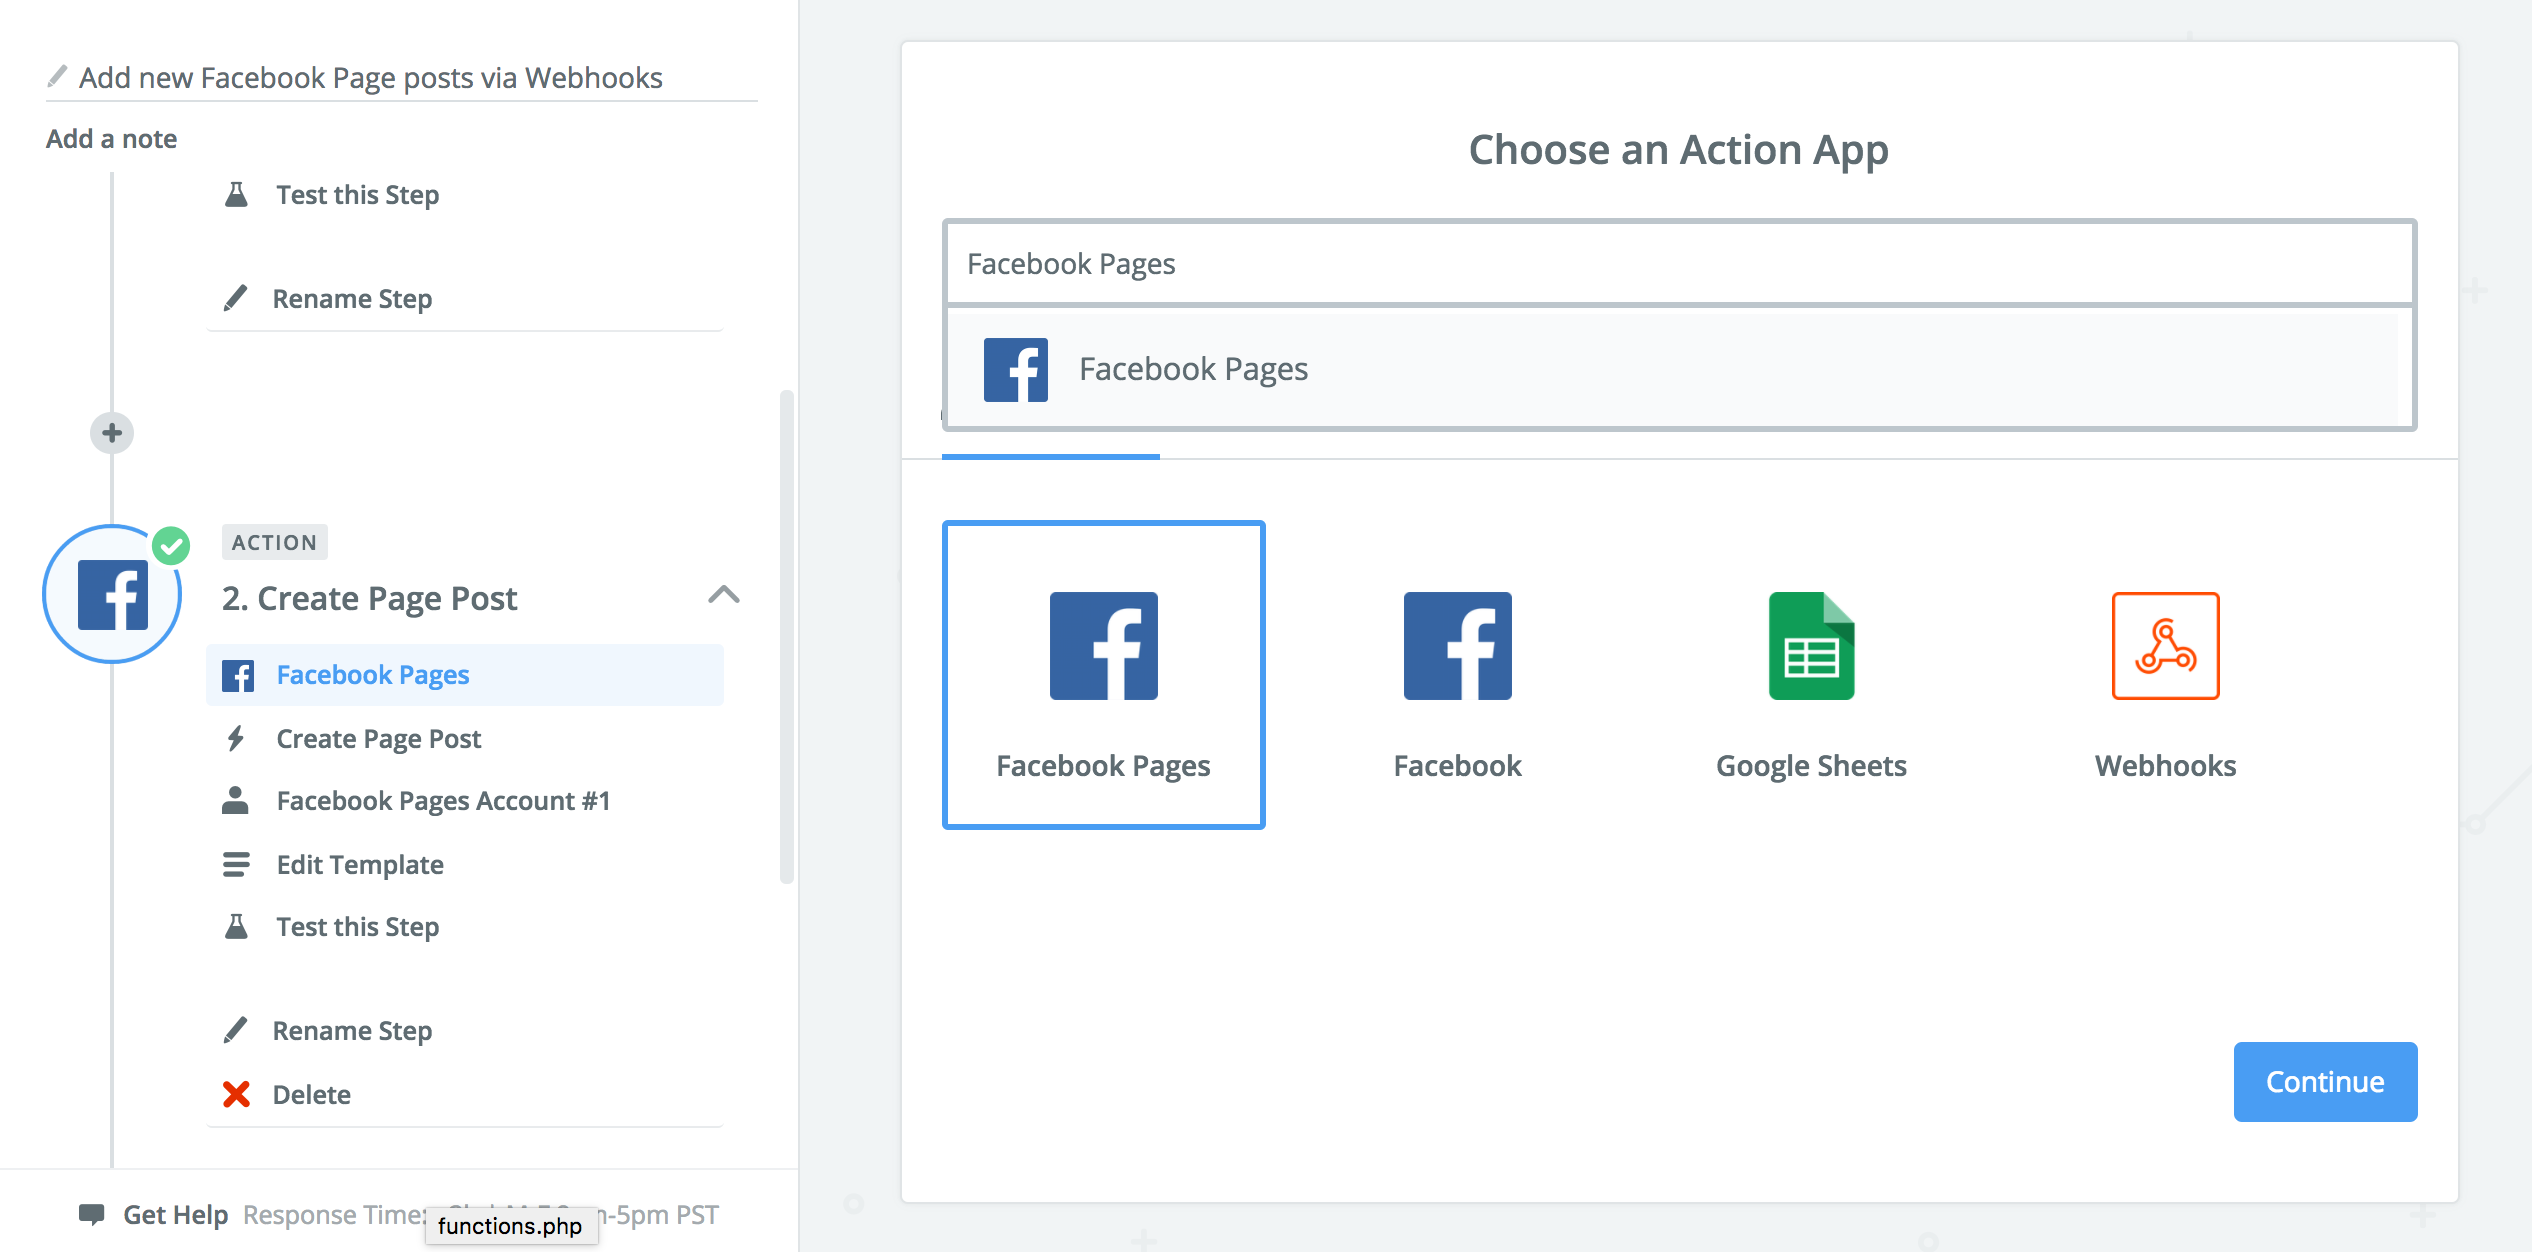 A screenshot of a user select Facebook Pages as an action.